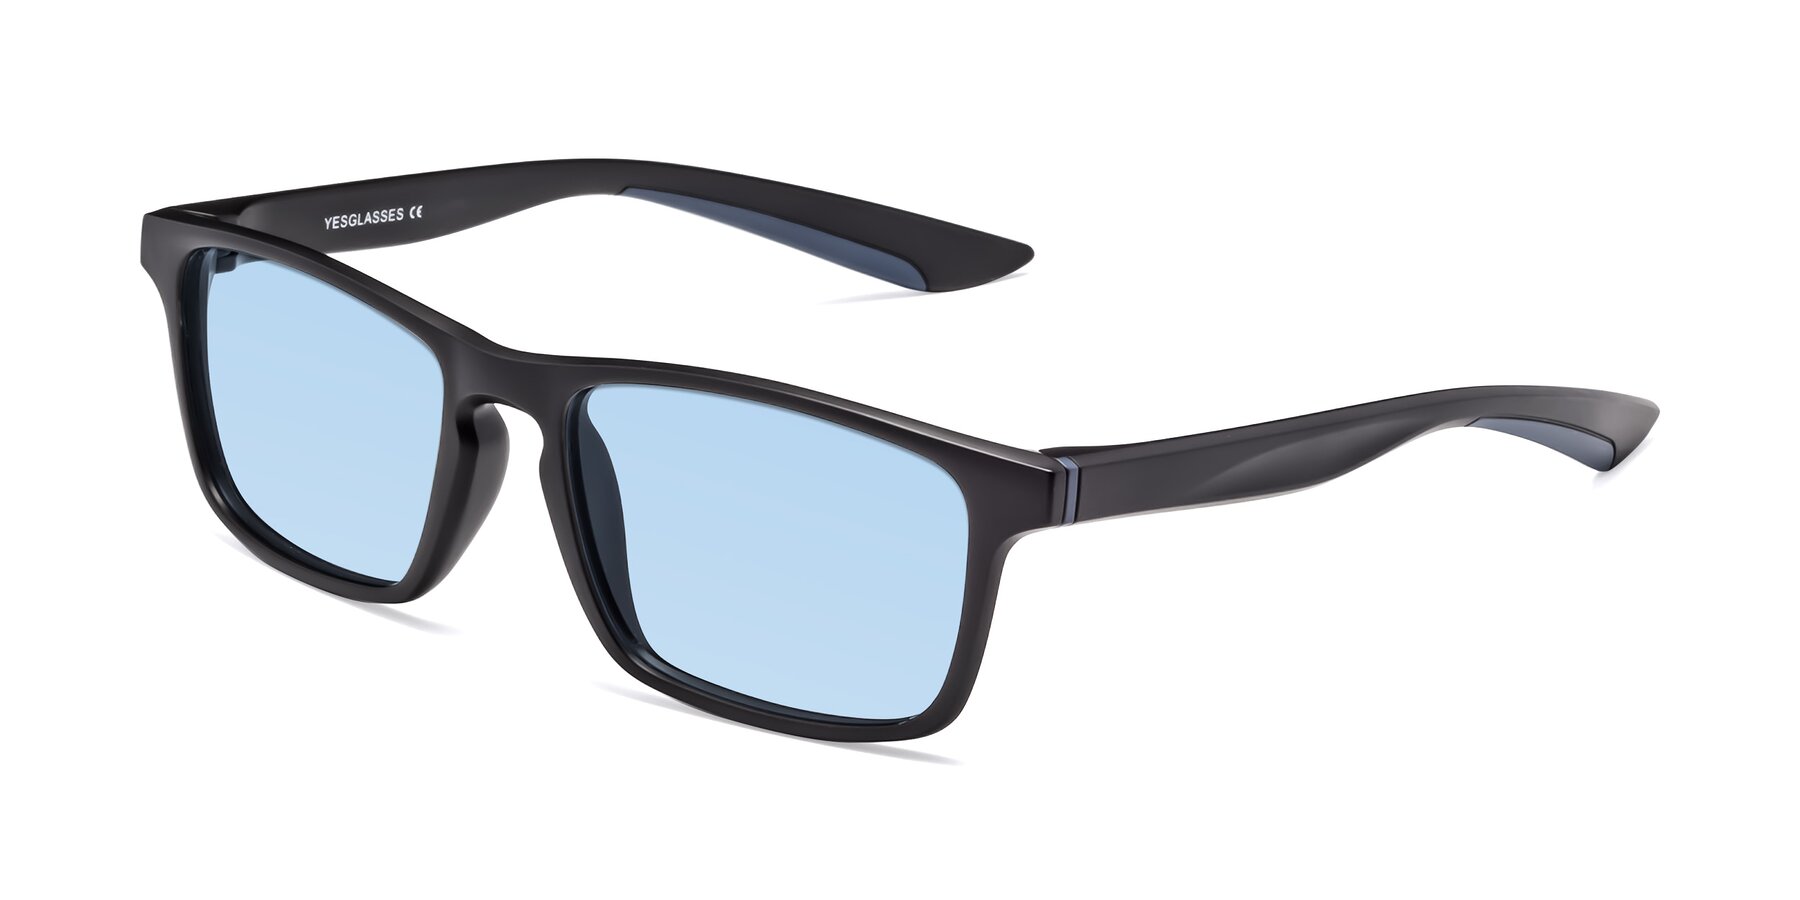 Angle of Passion in Matte Black-Blue with Light Blue Tinted Lenses